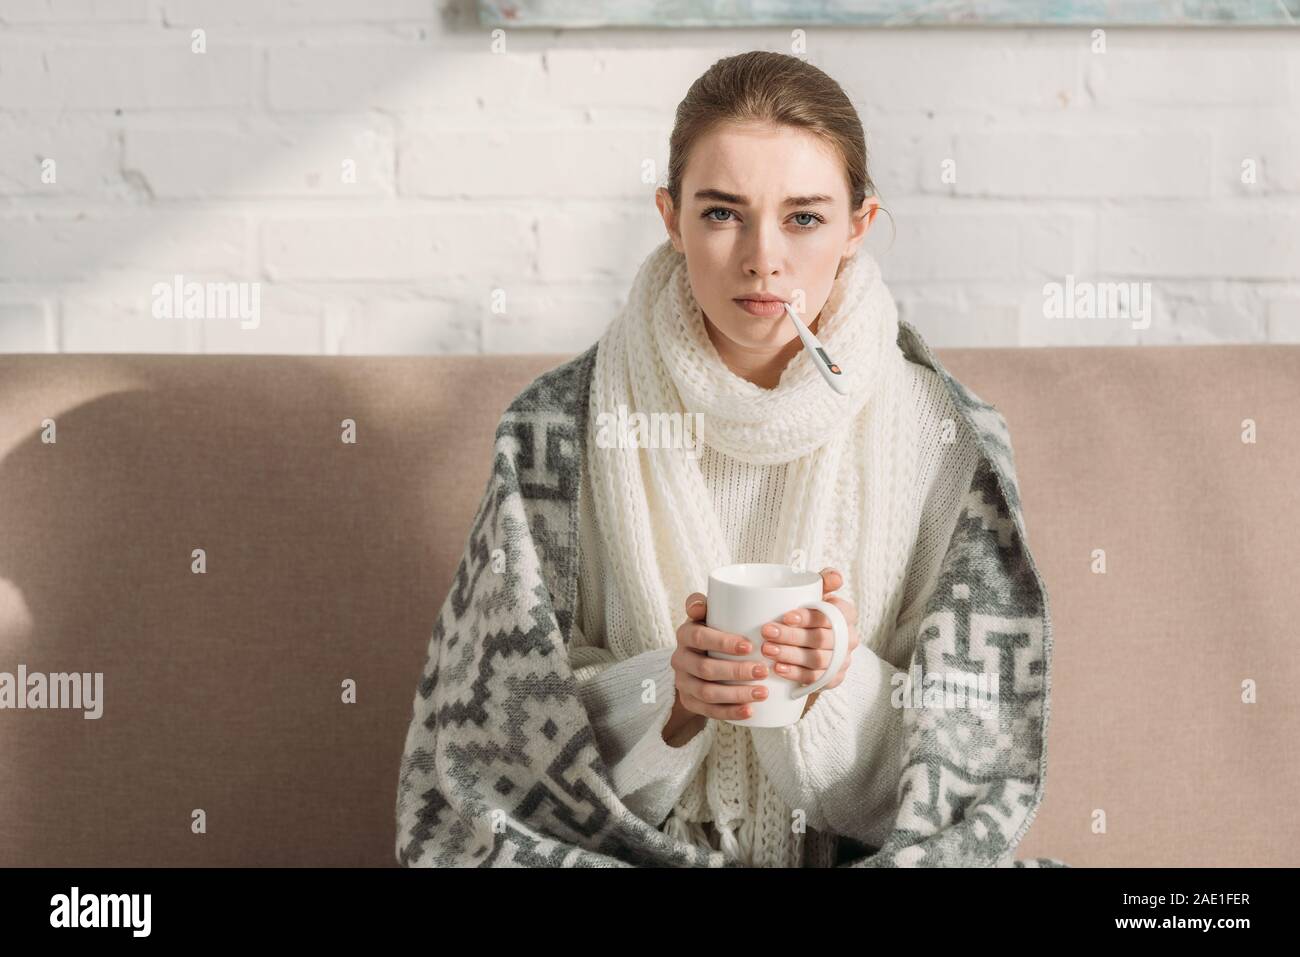 sick girl looking at camera while measuring temperature and holding cup of warming drink Stock Photo